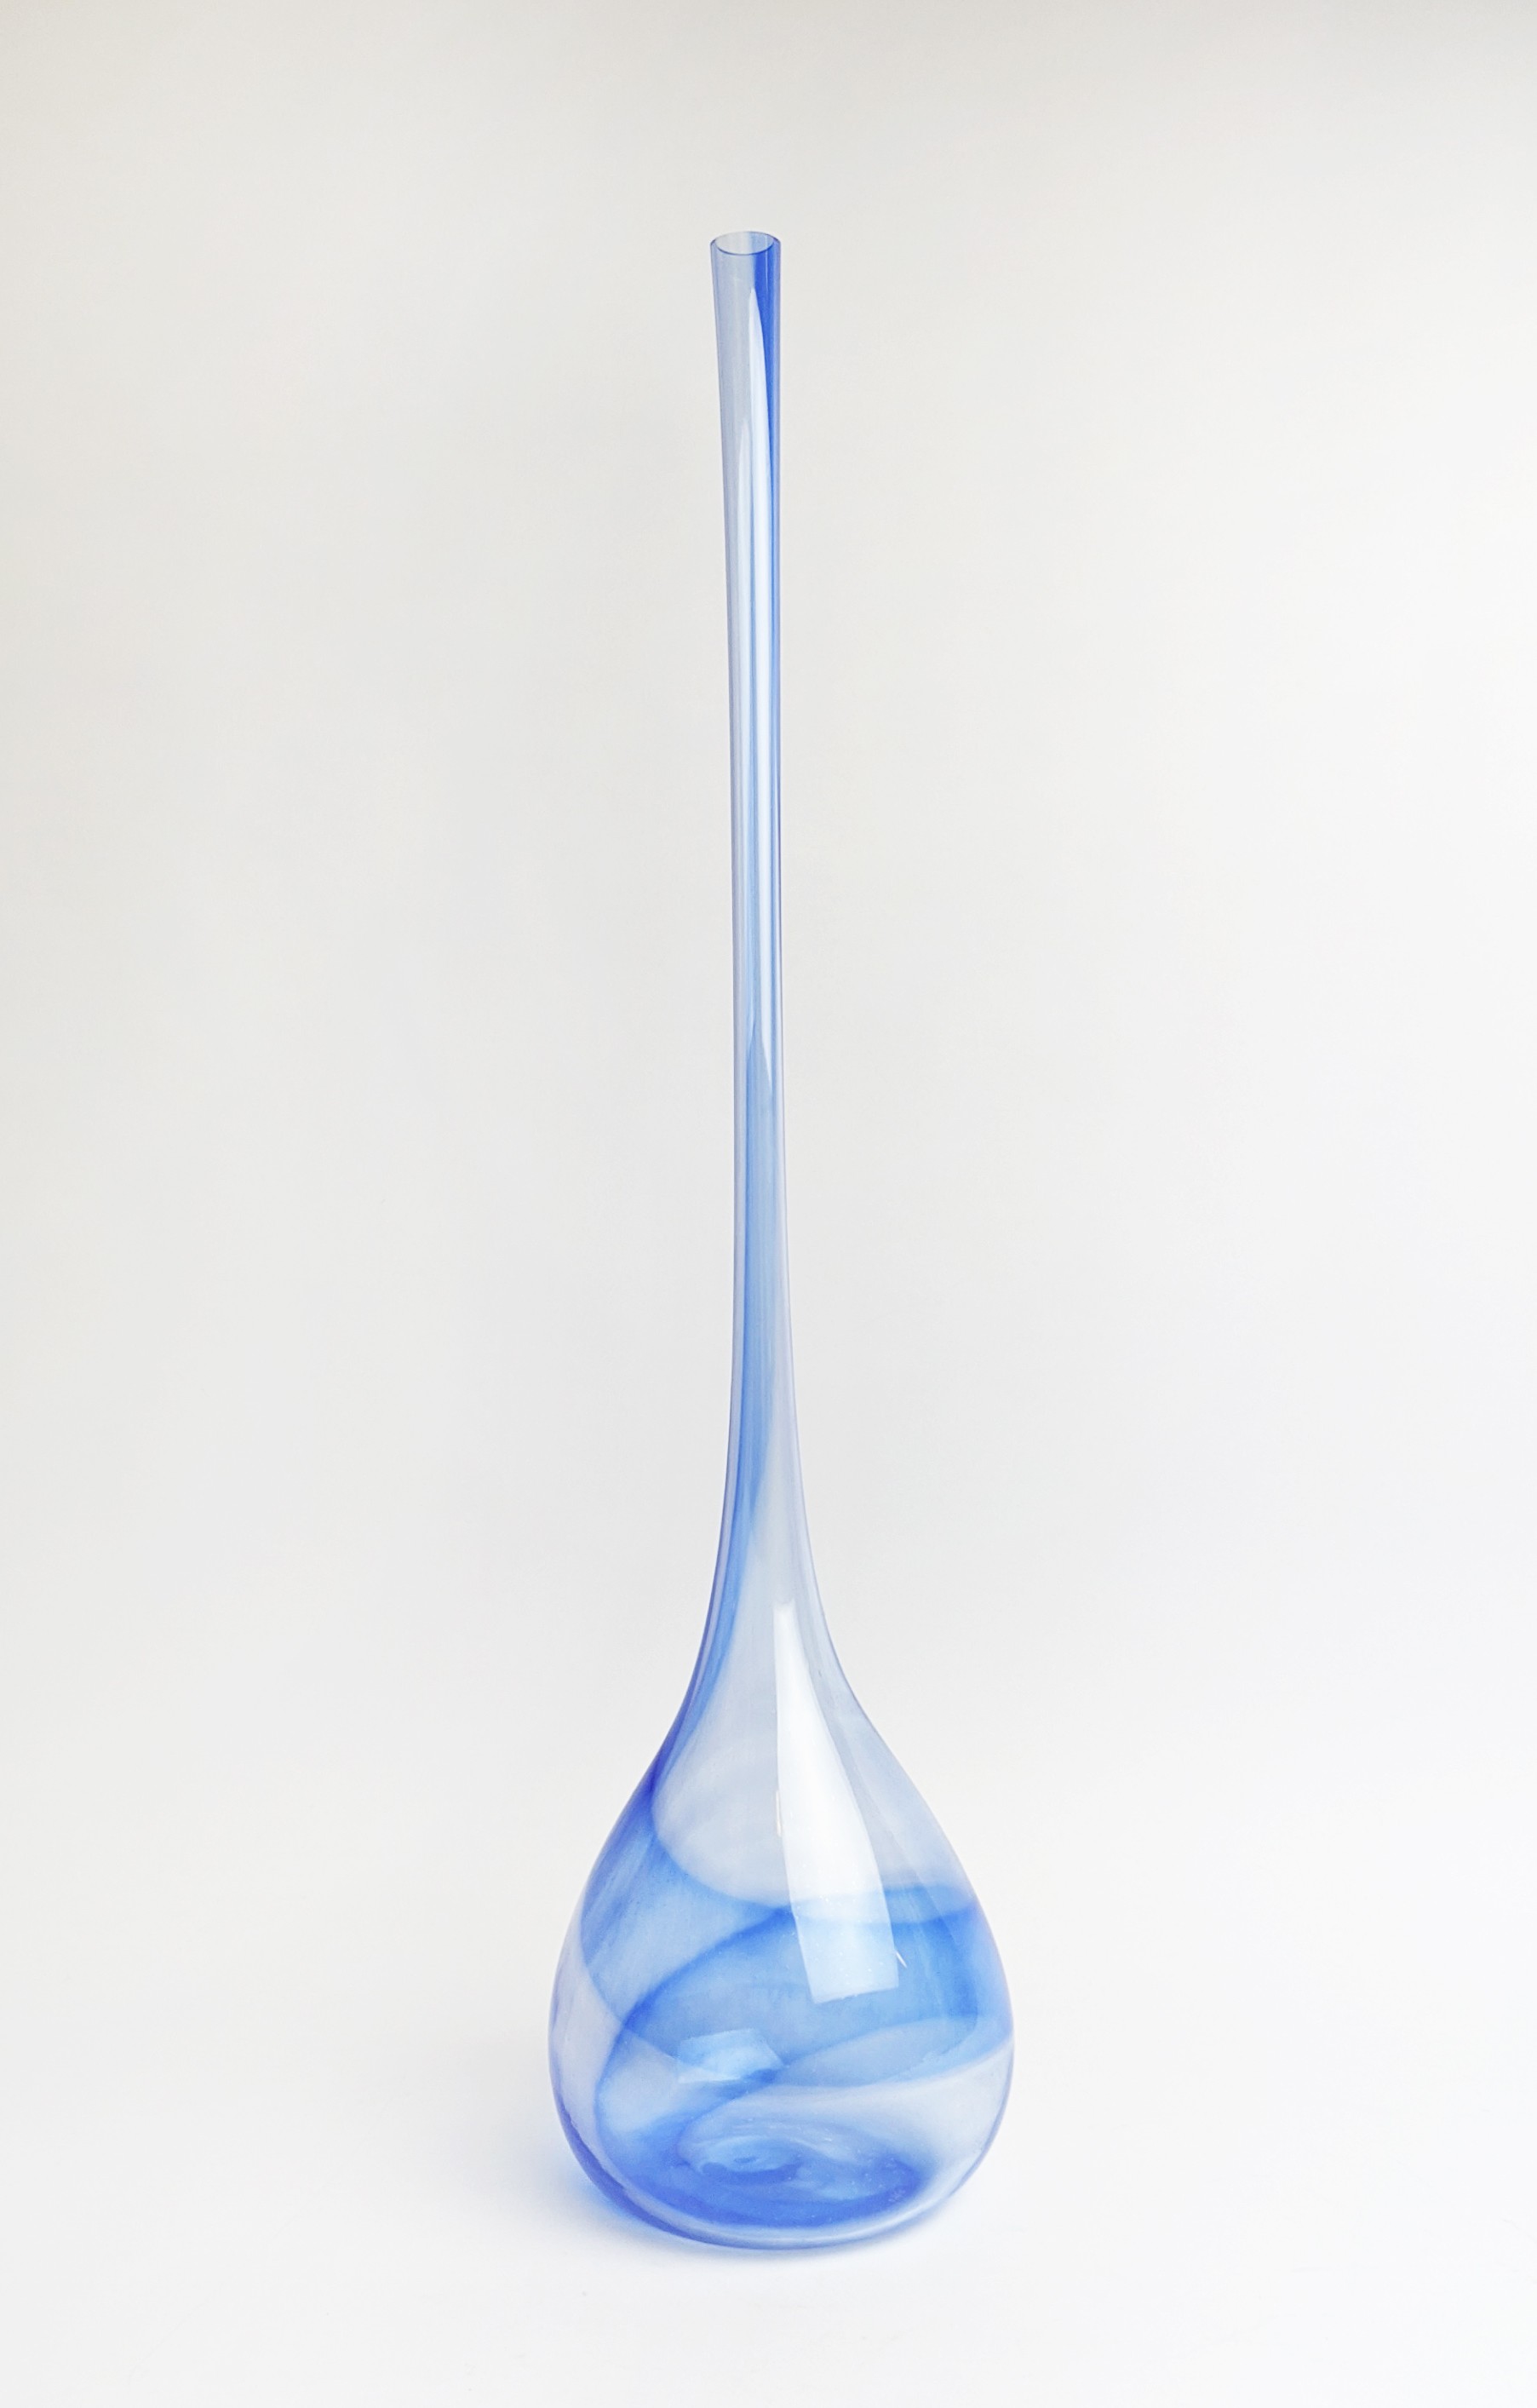 A MURANO TALL BLUE GLASS VASE, of baluster form with an elongated neck, with varying shades of